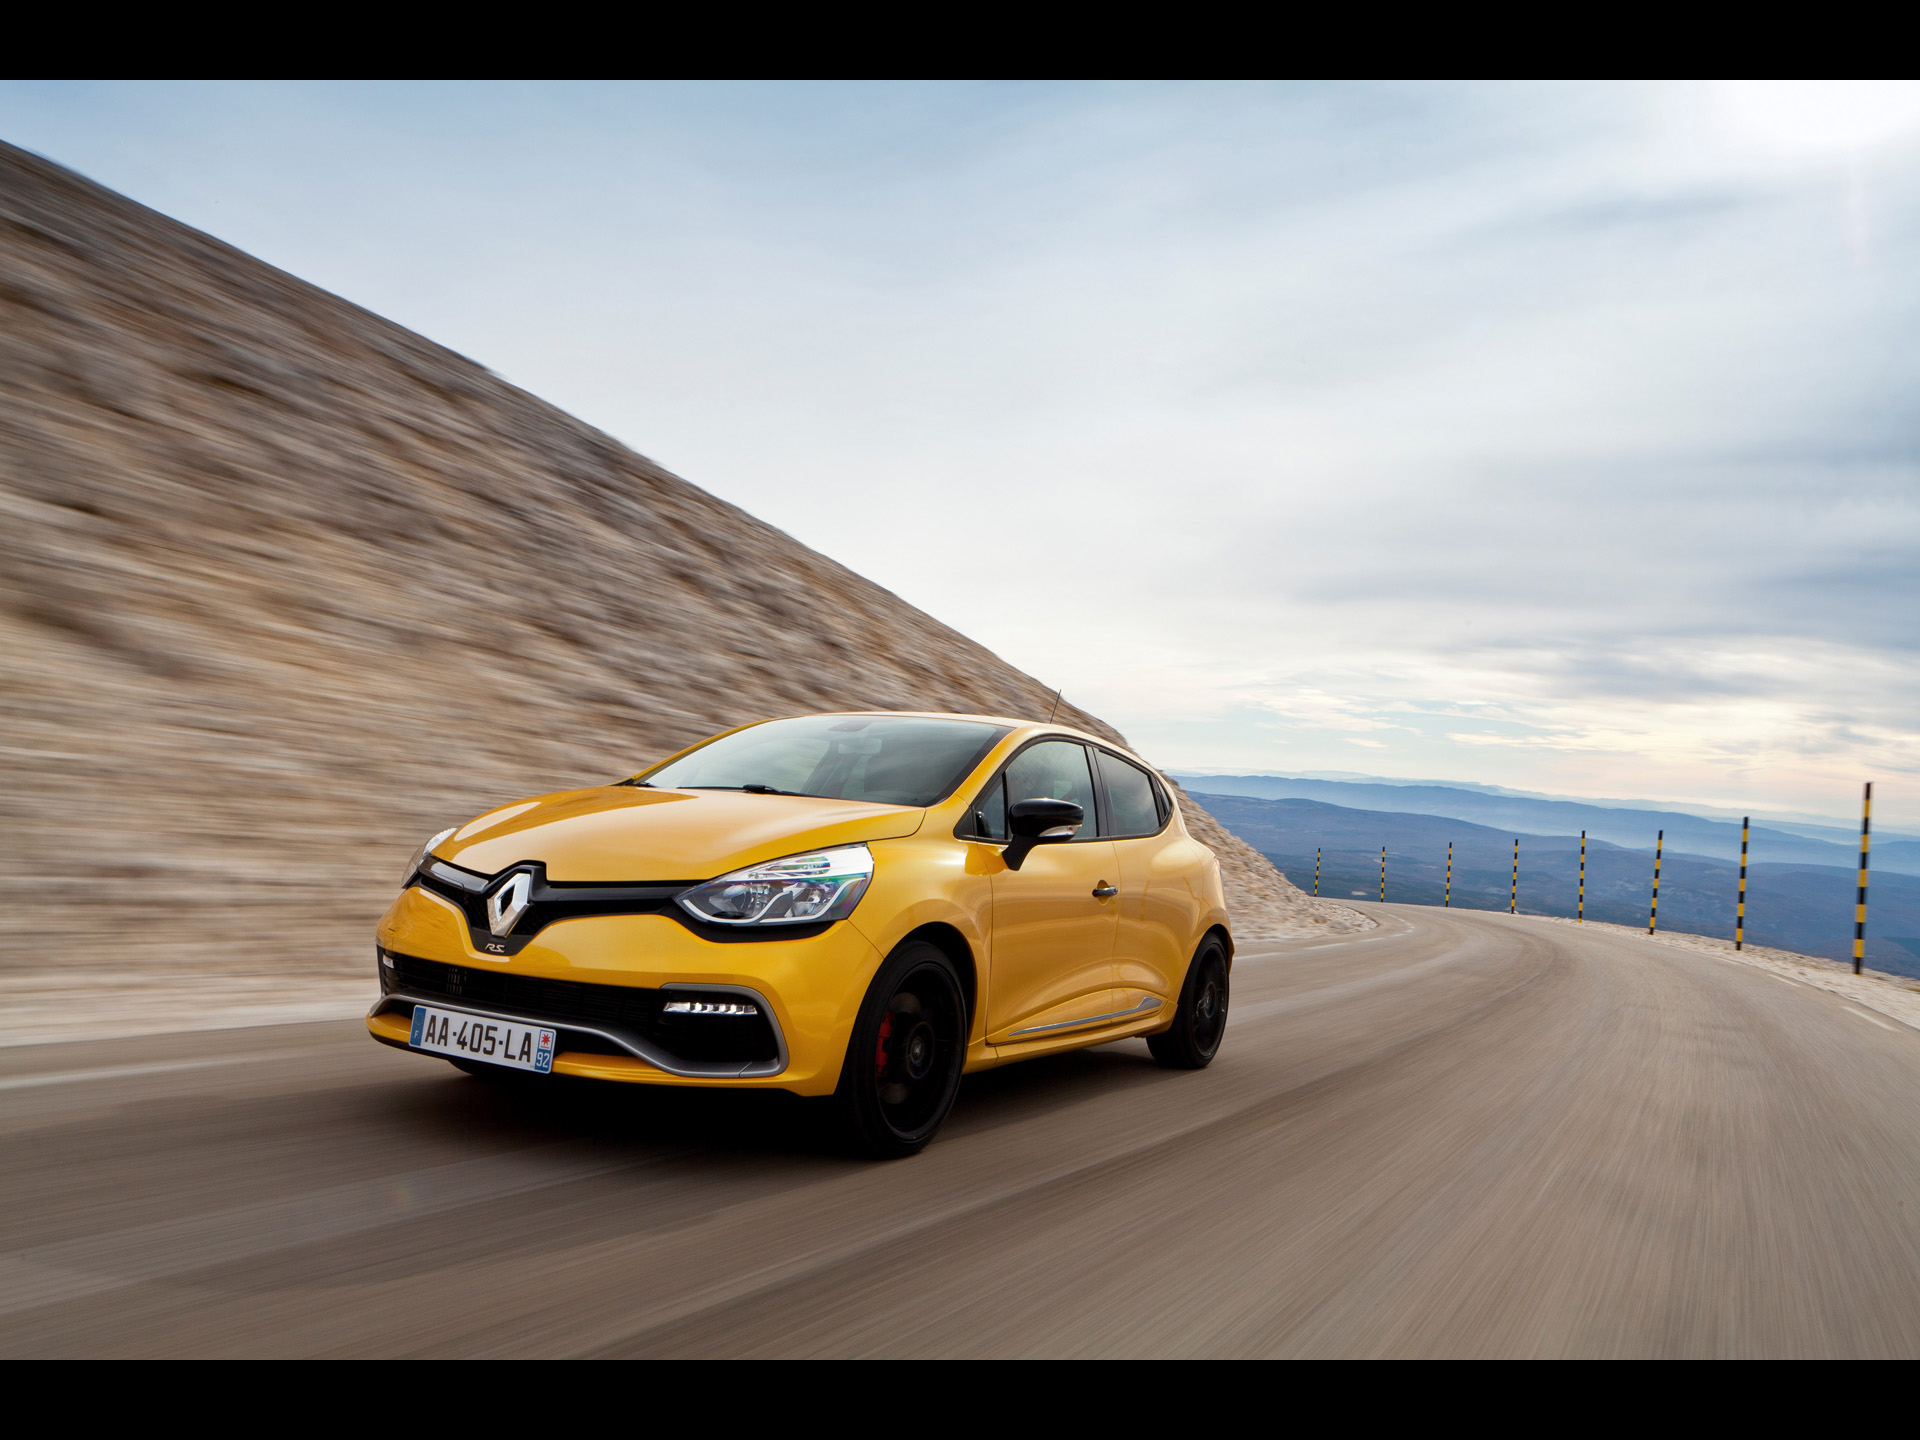 Vehicles 2013 Renault Clio Rs 200 Edc HD Wallpaper | Background Image